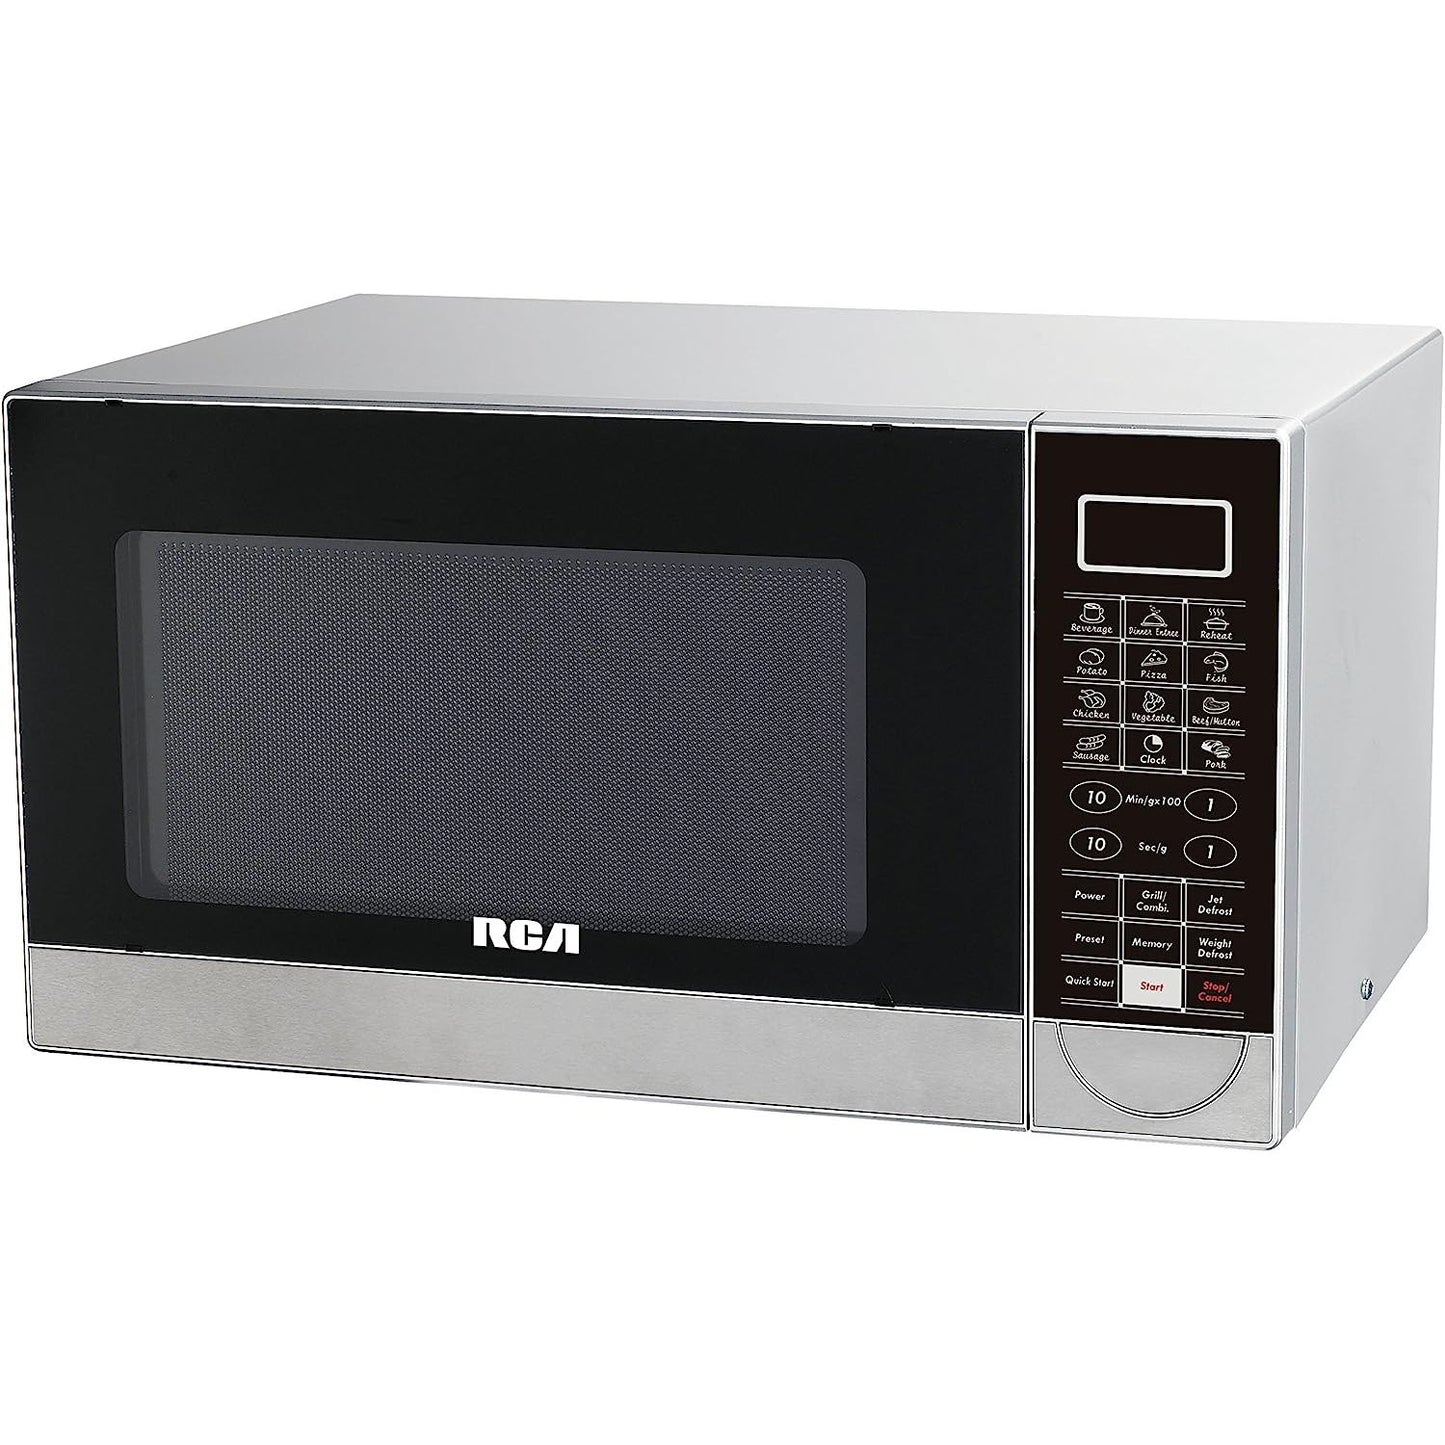 RCA Microwave and Grill, 1.1 Cubic Feet, Stainless Steel RMW1182